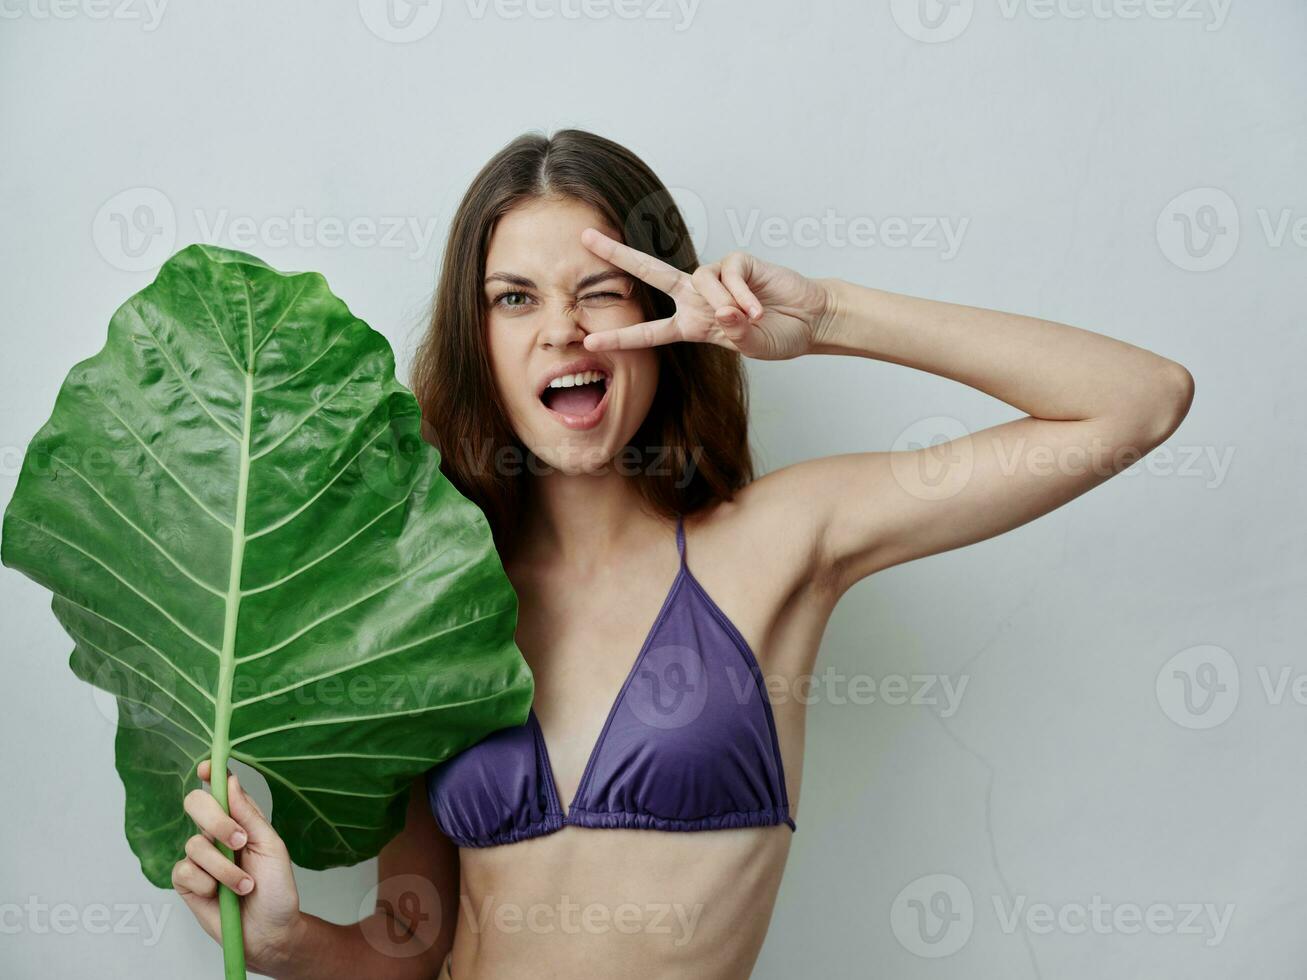 cheerful woman holding hands near face green leaf swimsuit emotions close-up photo